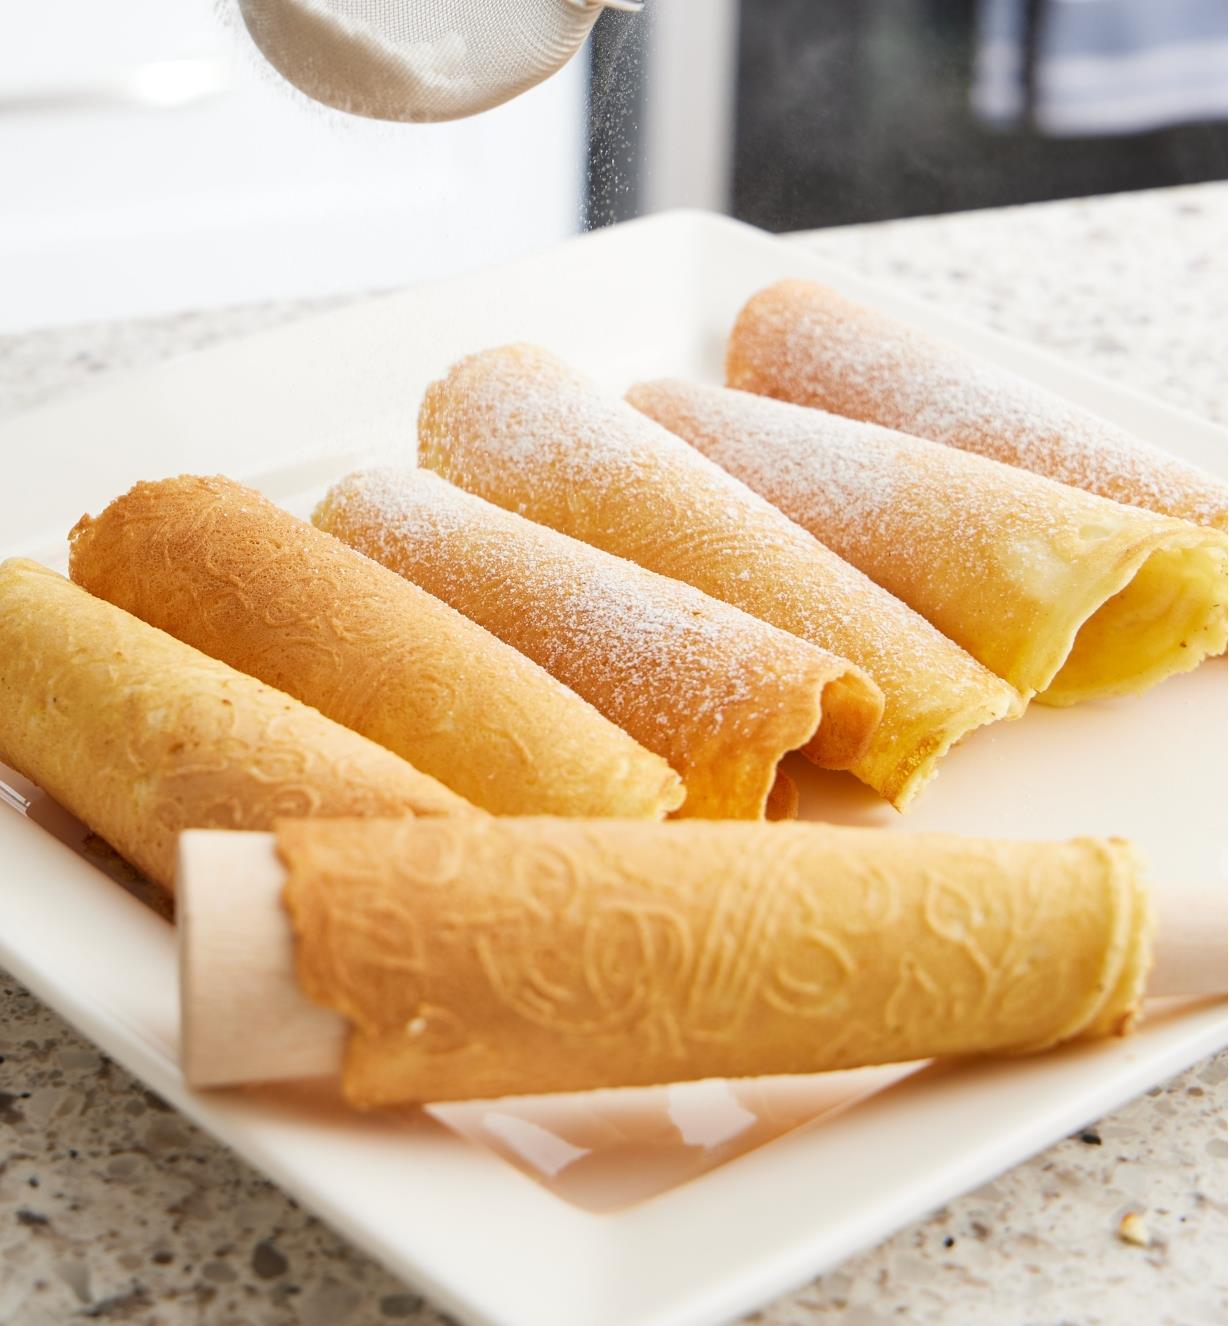 The warm krumkake cookie rolled around a wooden cone to create the hollow cone-shape